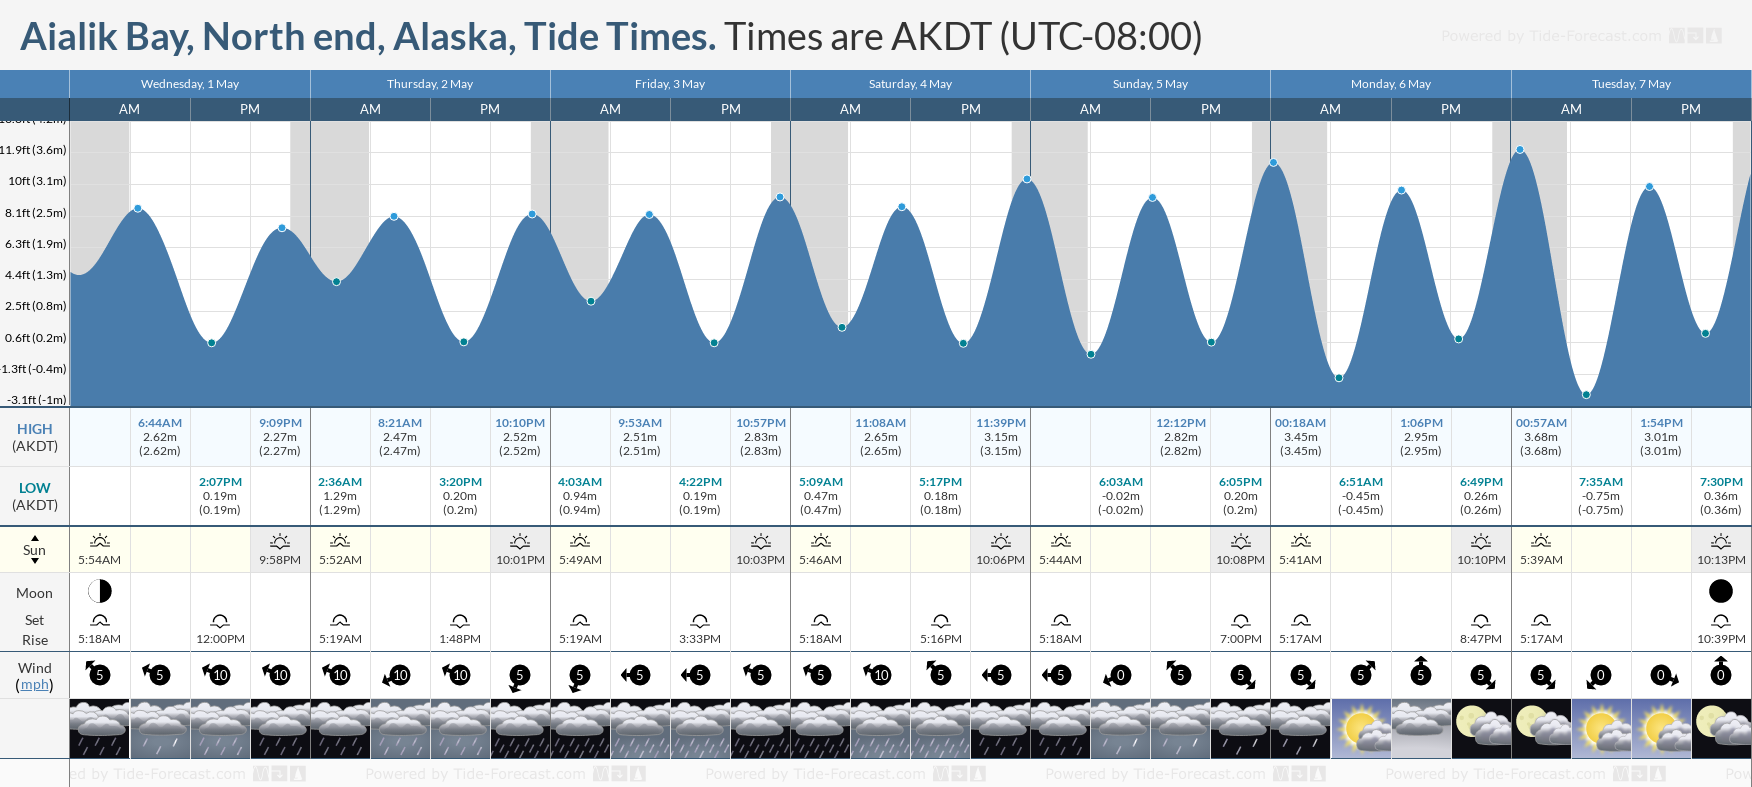 Aialik Bay, North end, Alaska Tide Chart including high and low tide tide times for the next 7 days